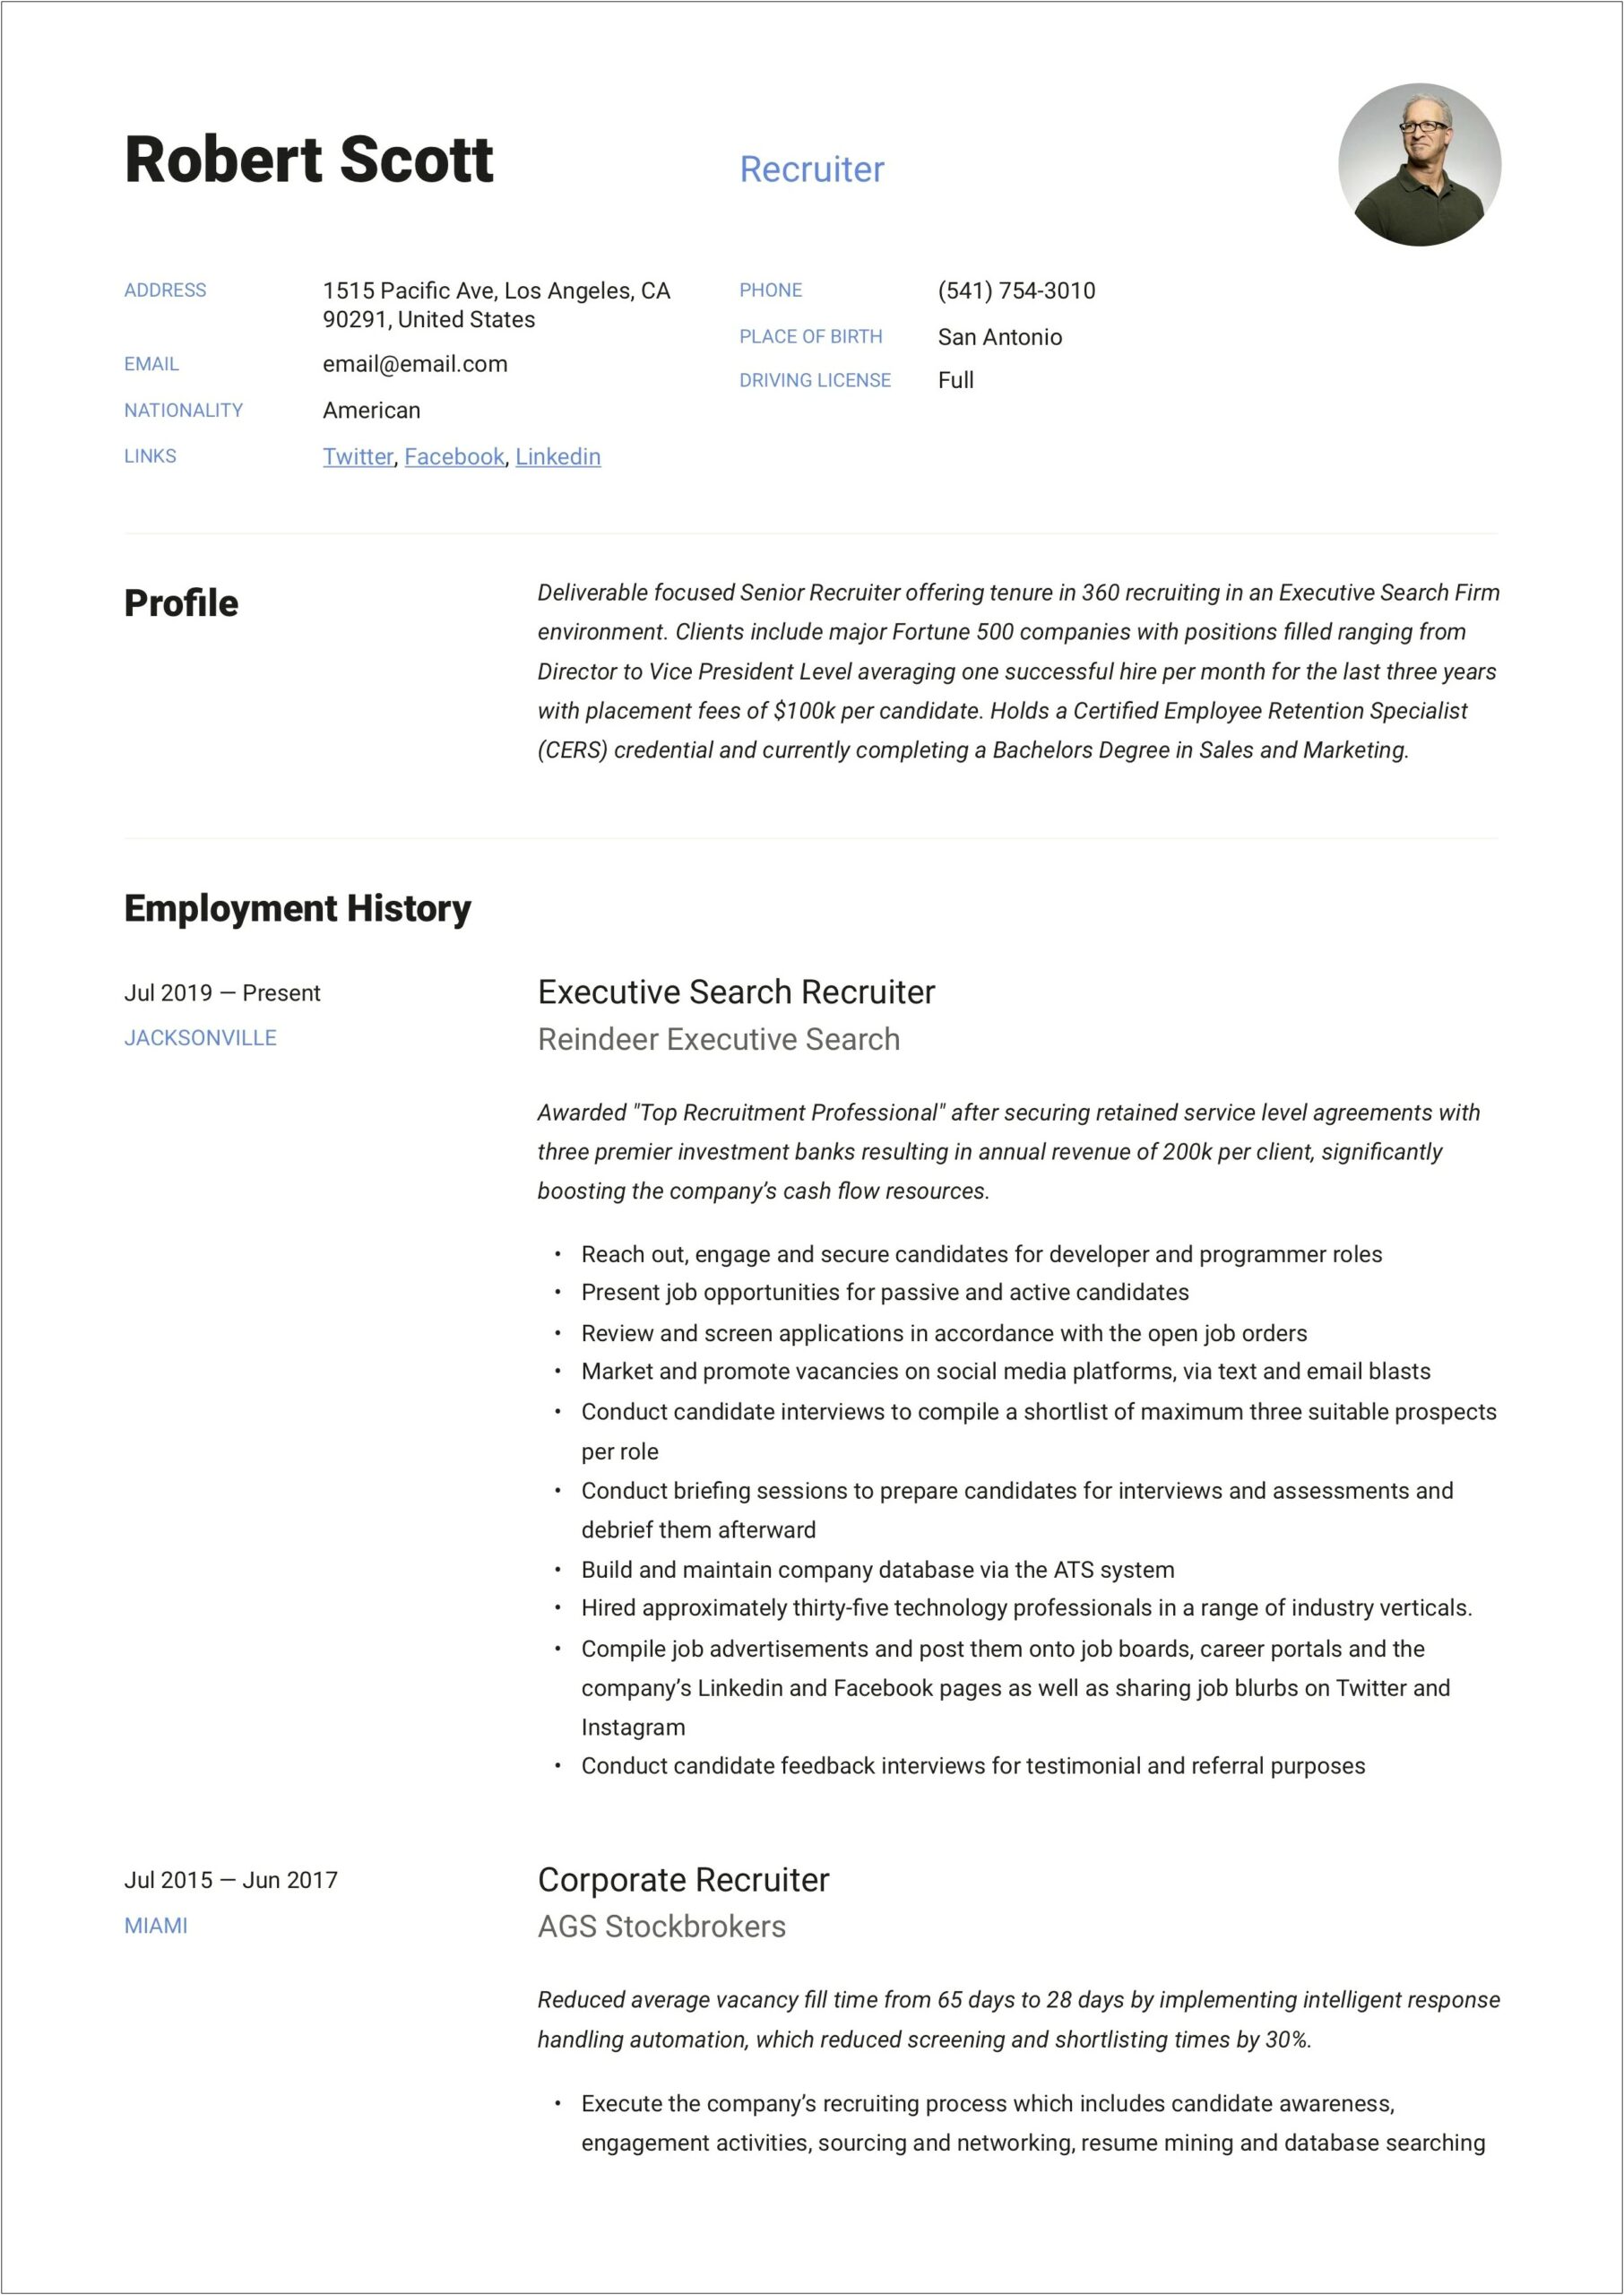 Send Email To Recruiter With Resume Sample